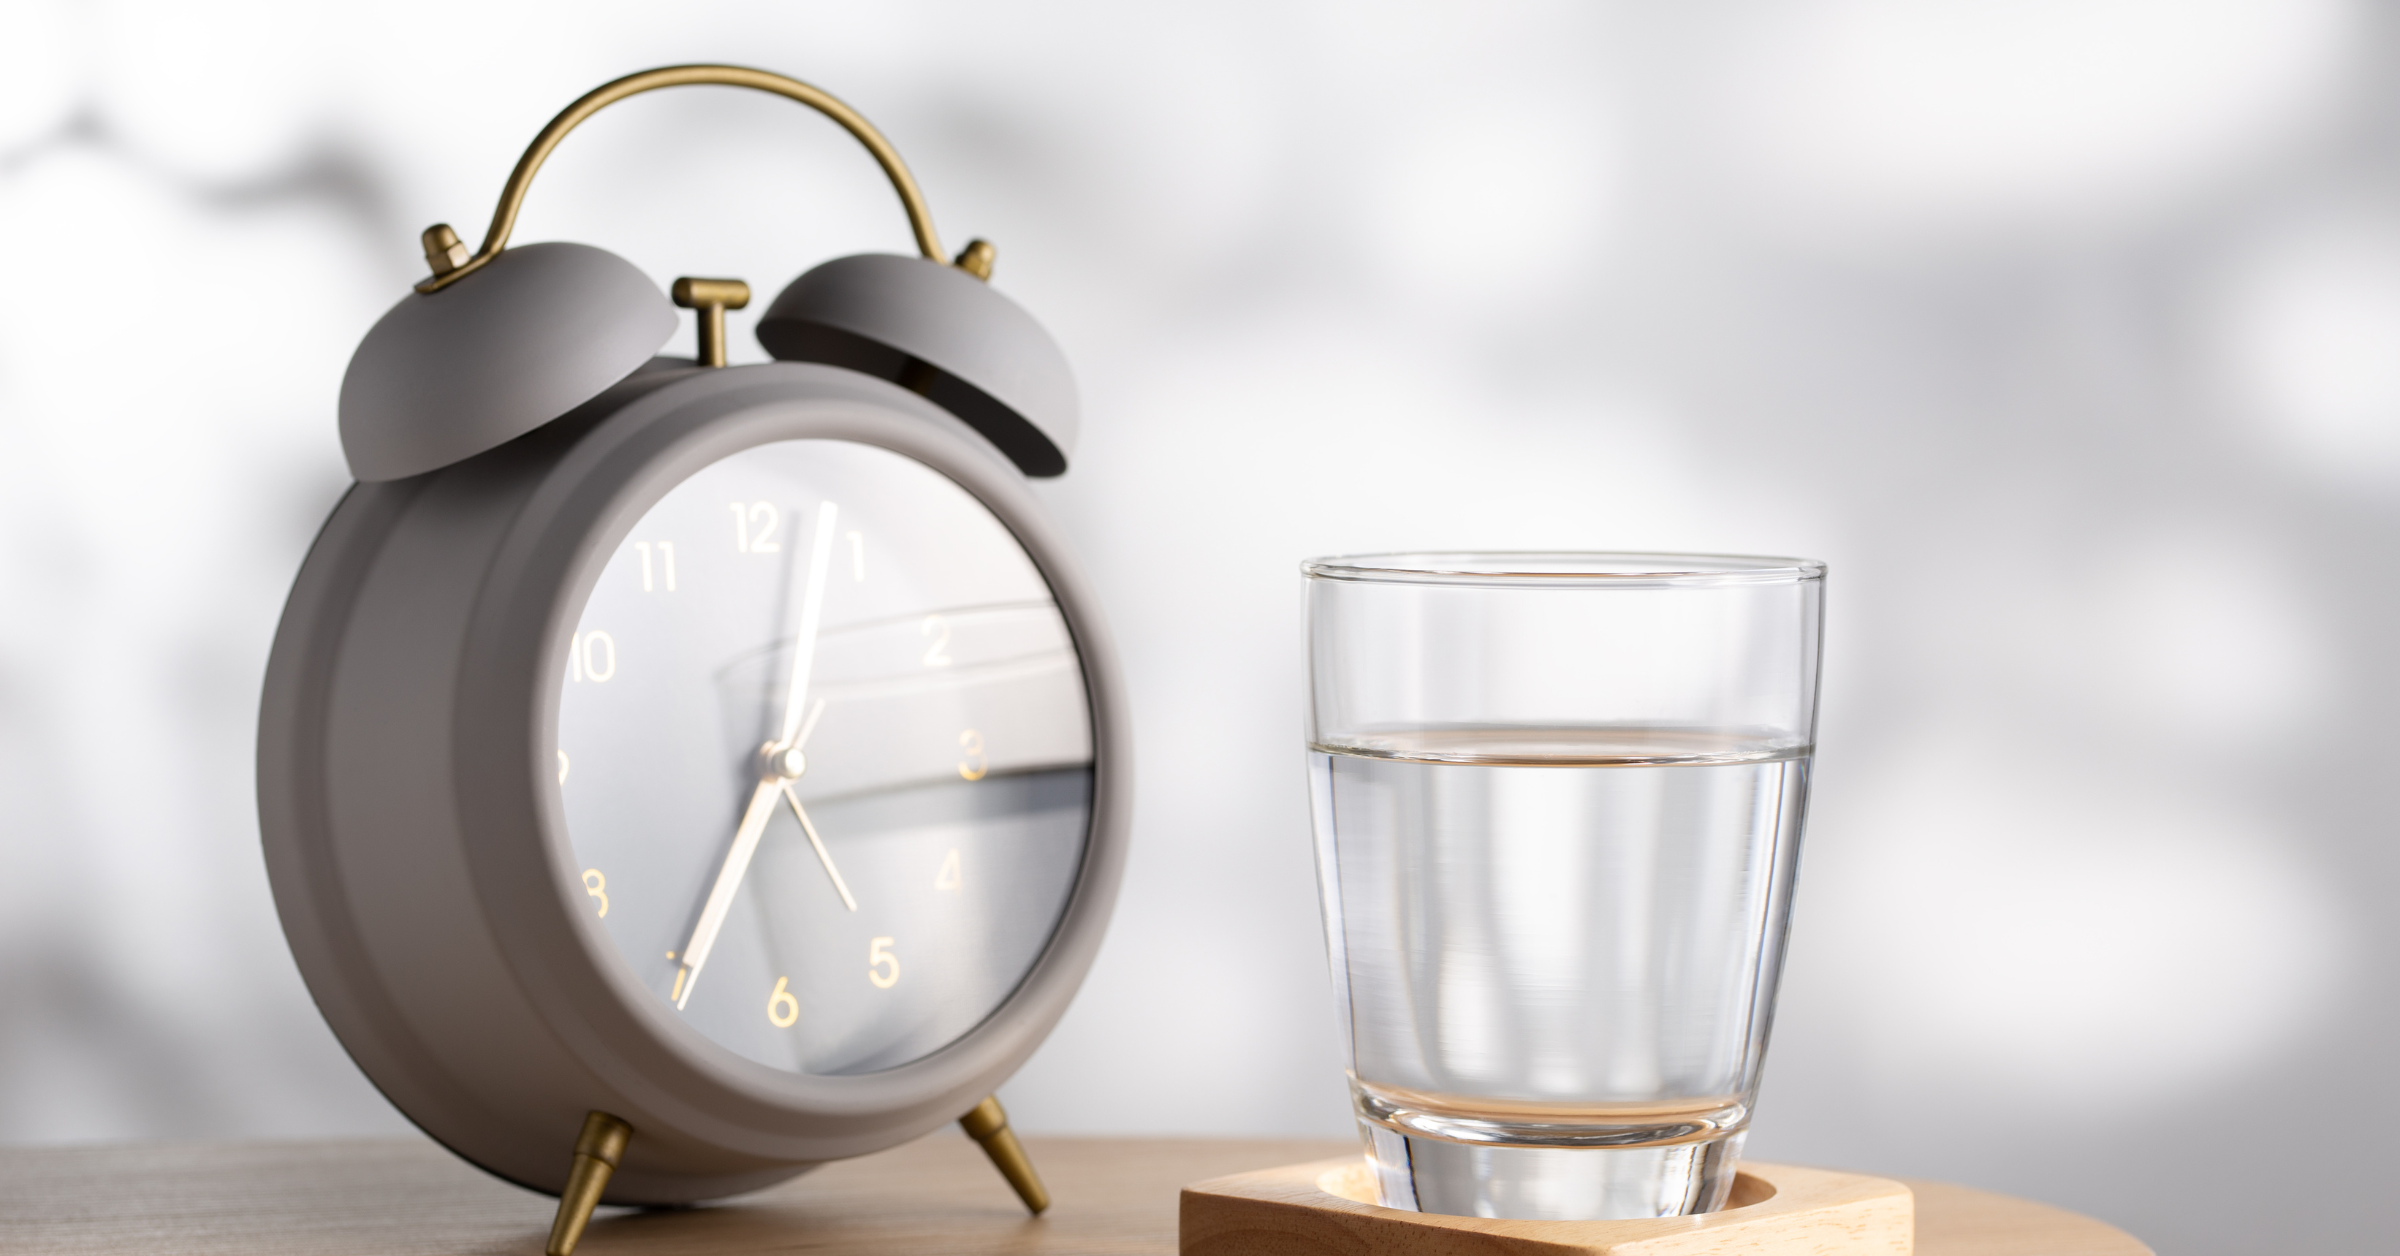 An alarm clock & a glass of water placed on the table